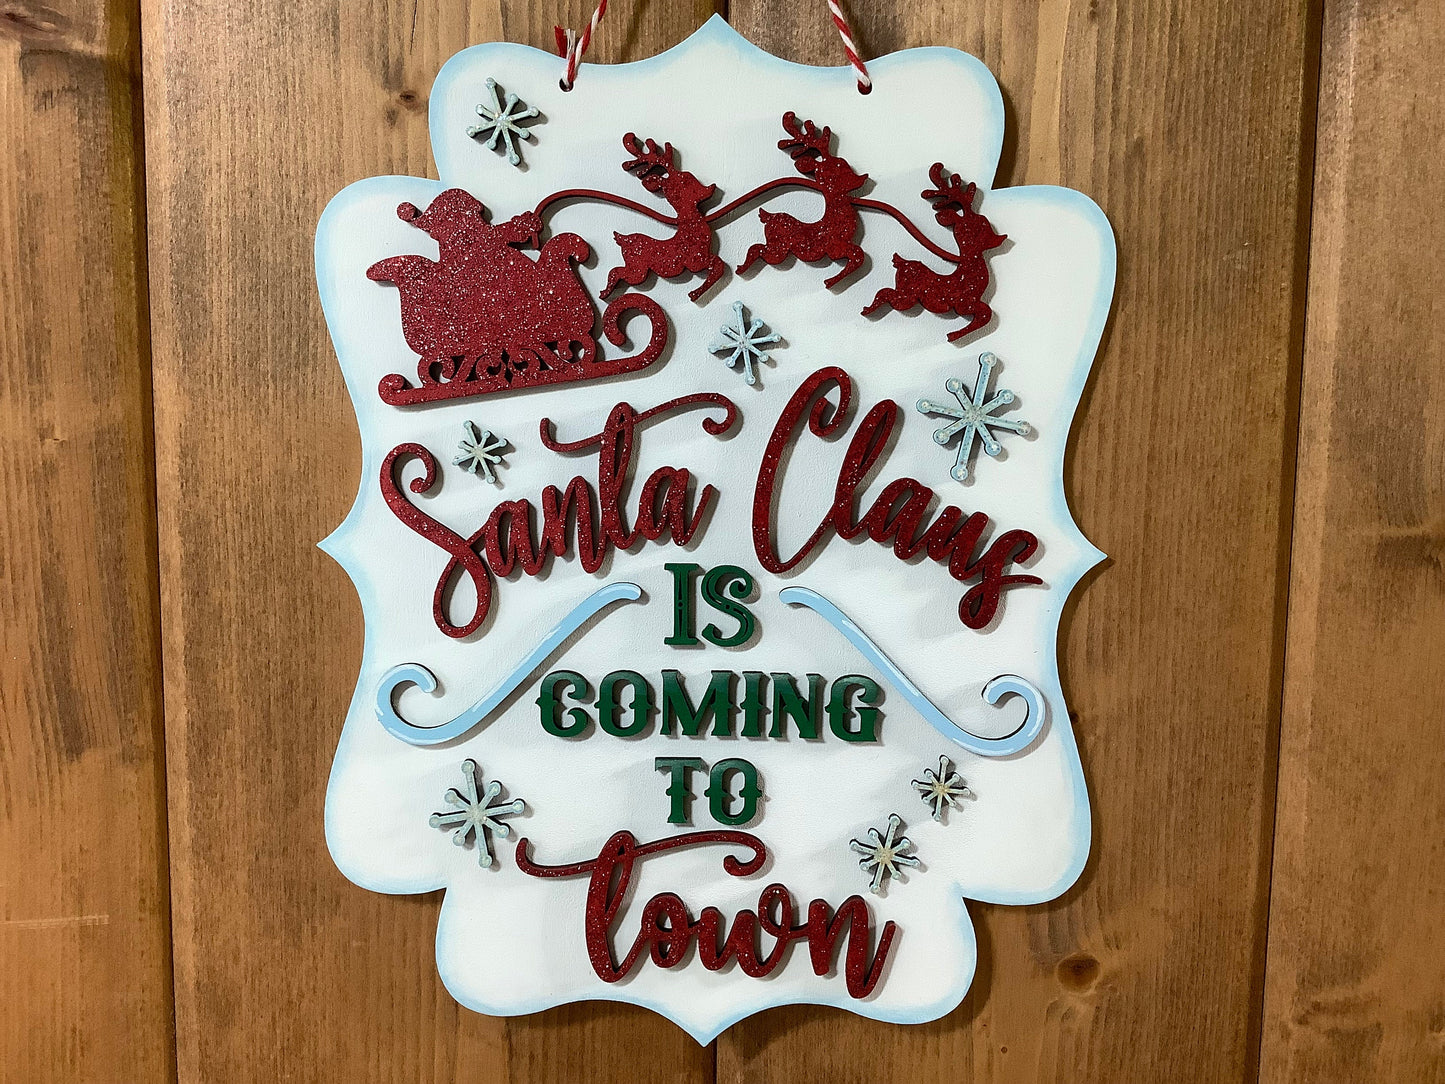 Santa Is Coming To Town Adorable Hand Painted Laser Cut Wood Christmas Sign, Red Glitter Painted Santa, Sleigh, Reindeer, Snowflakes, Green